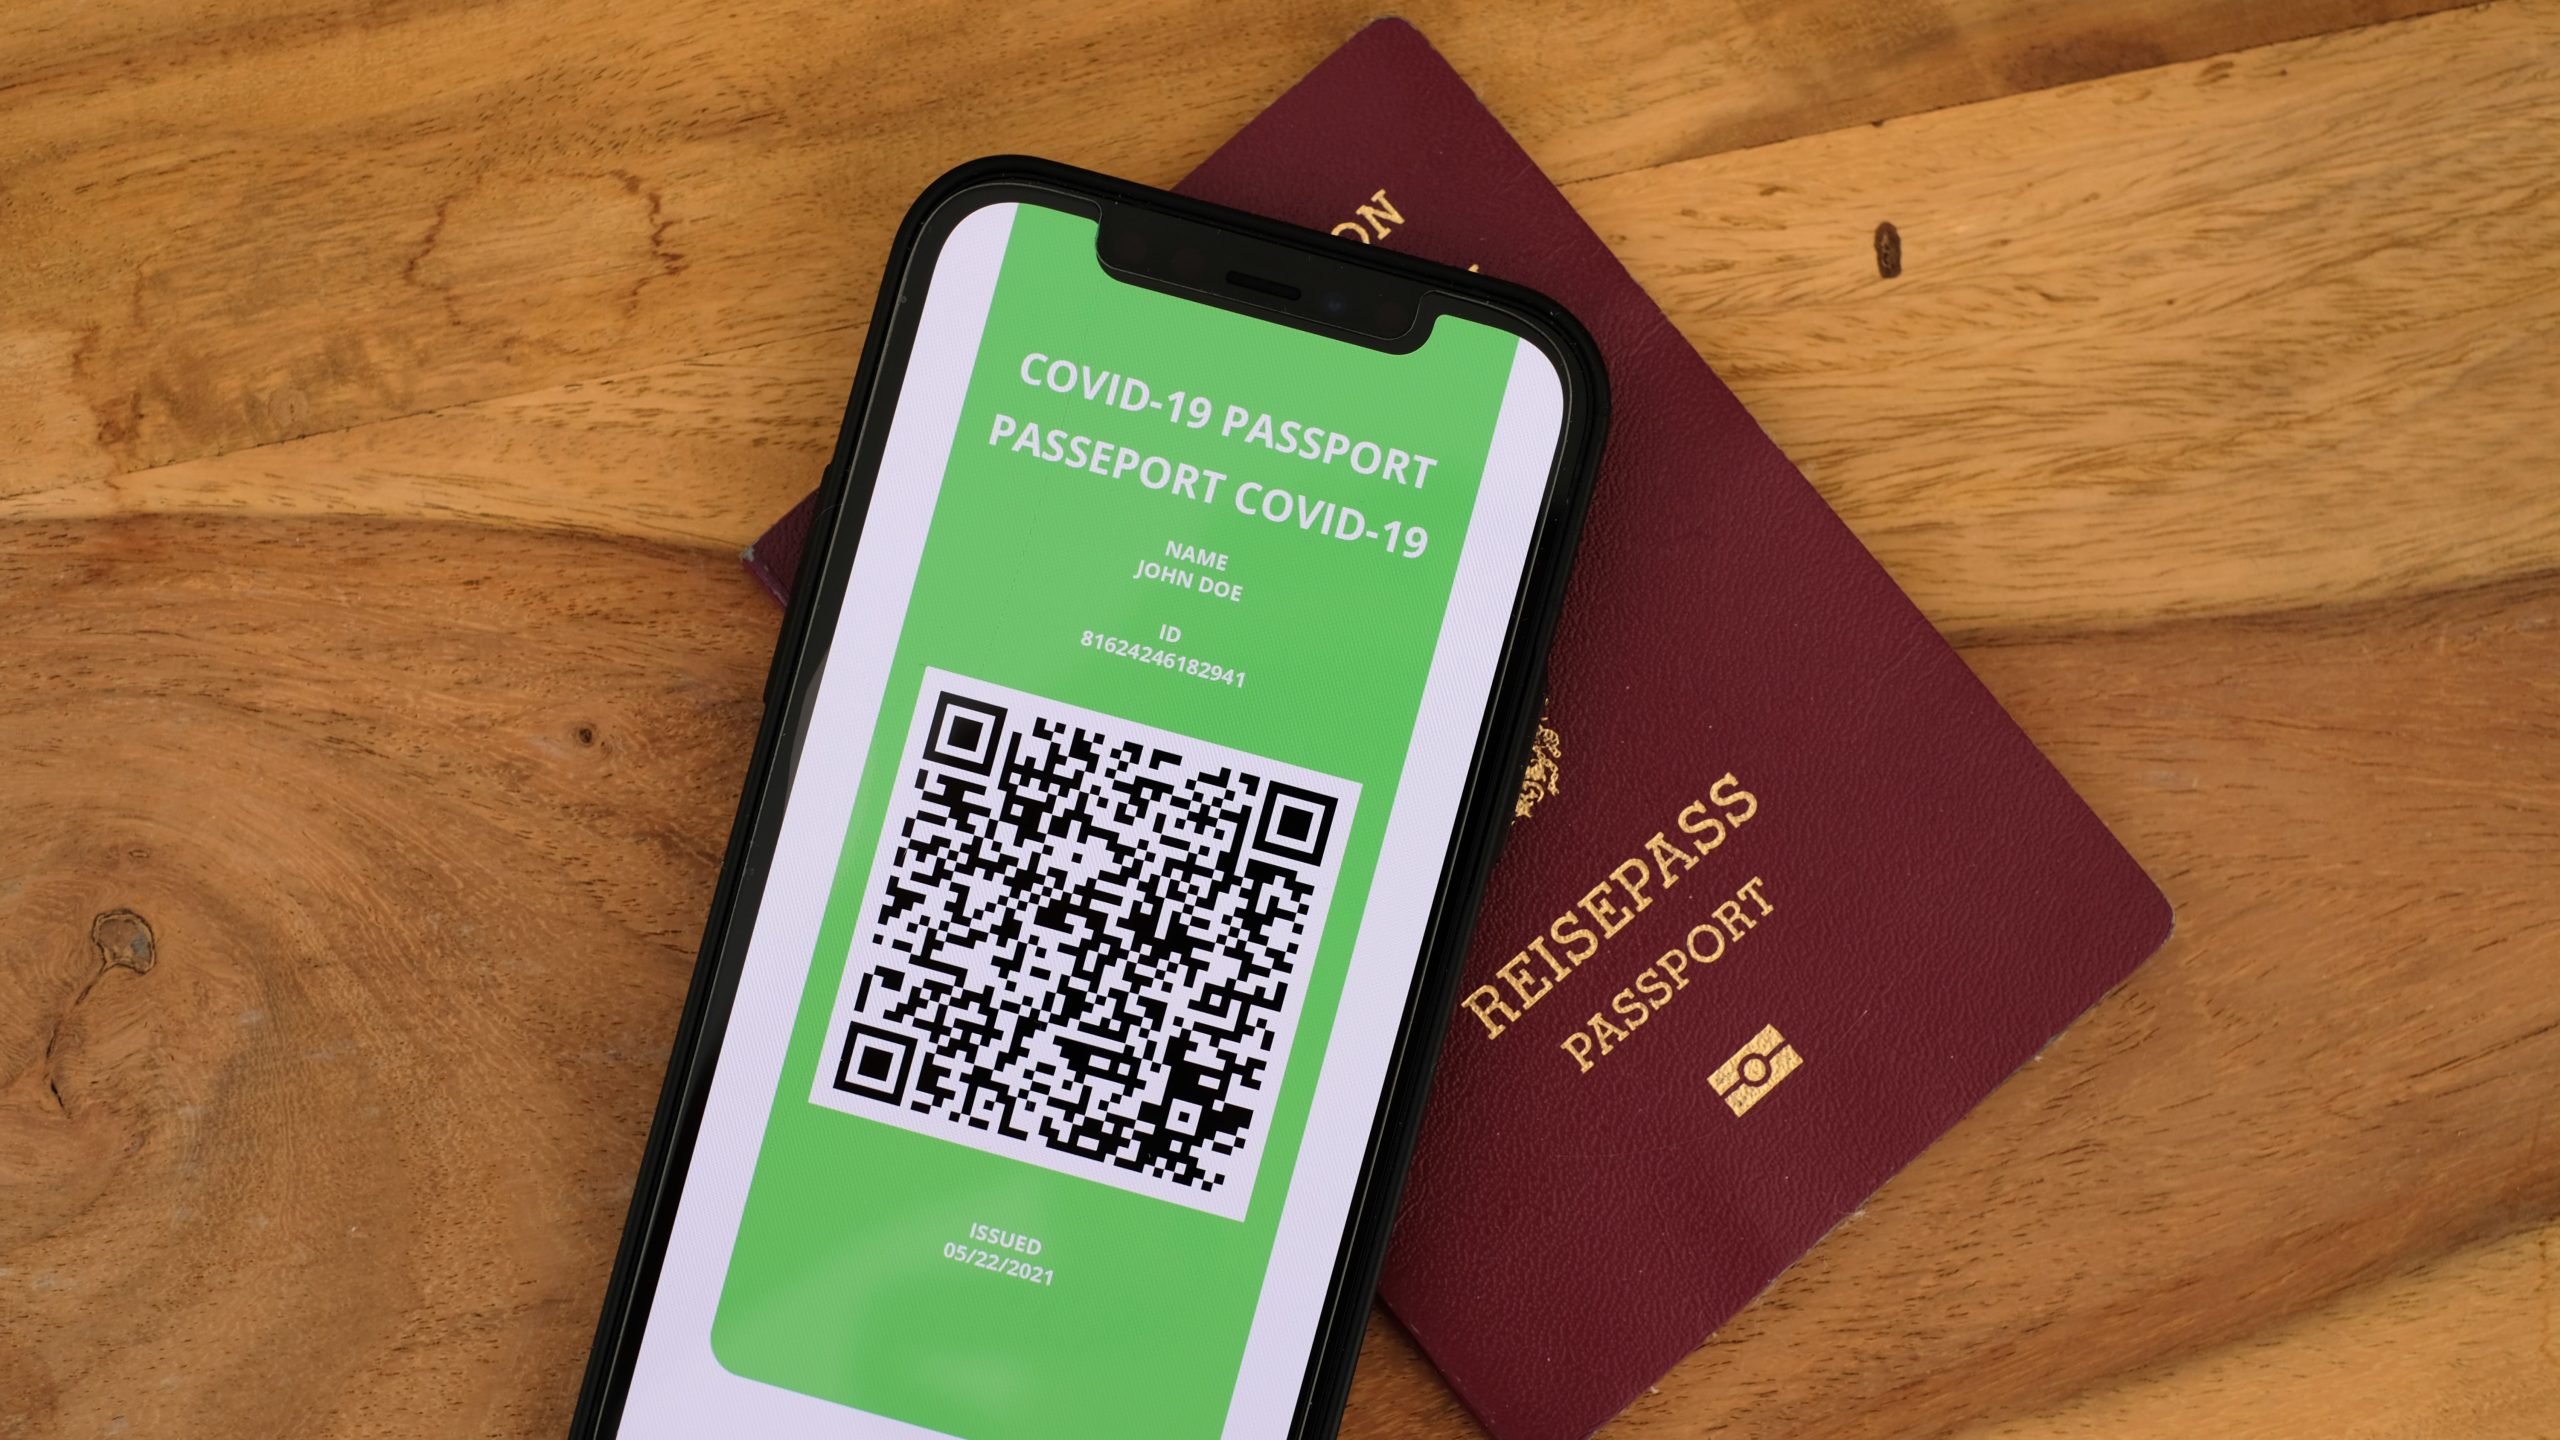 Italy: Mandatory Green Pass & Extended State of Emergency